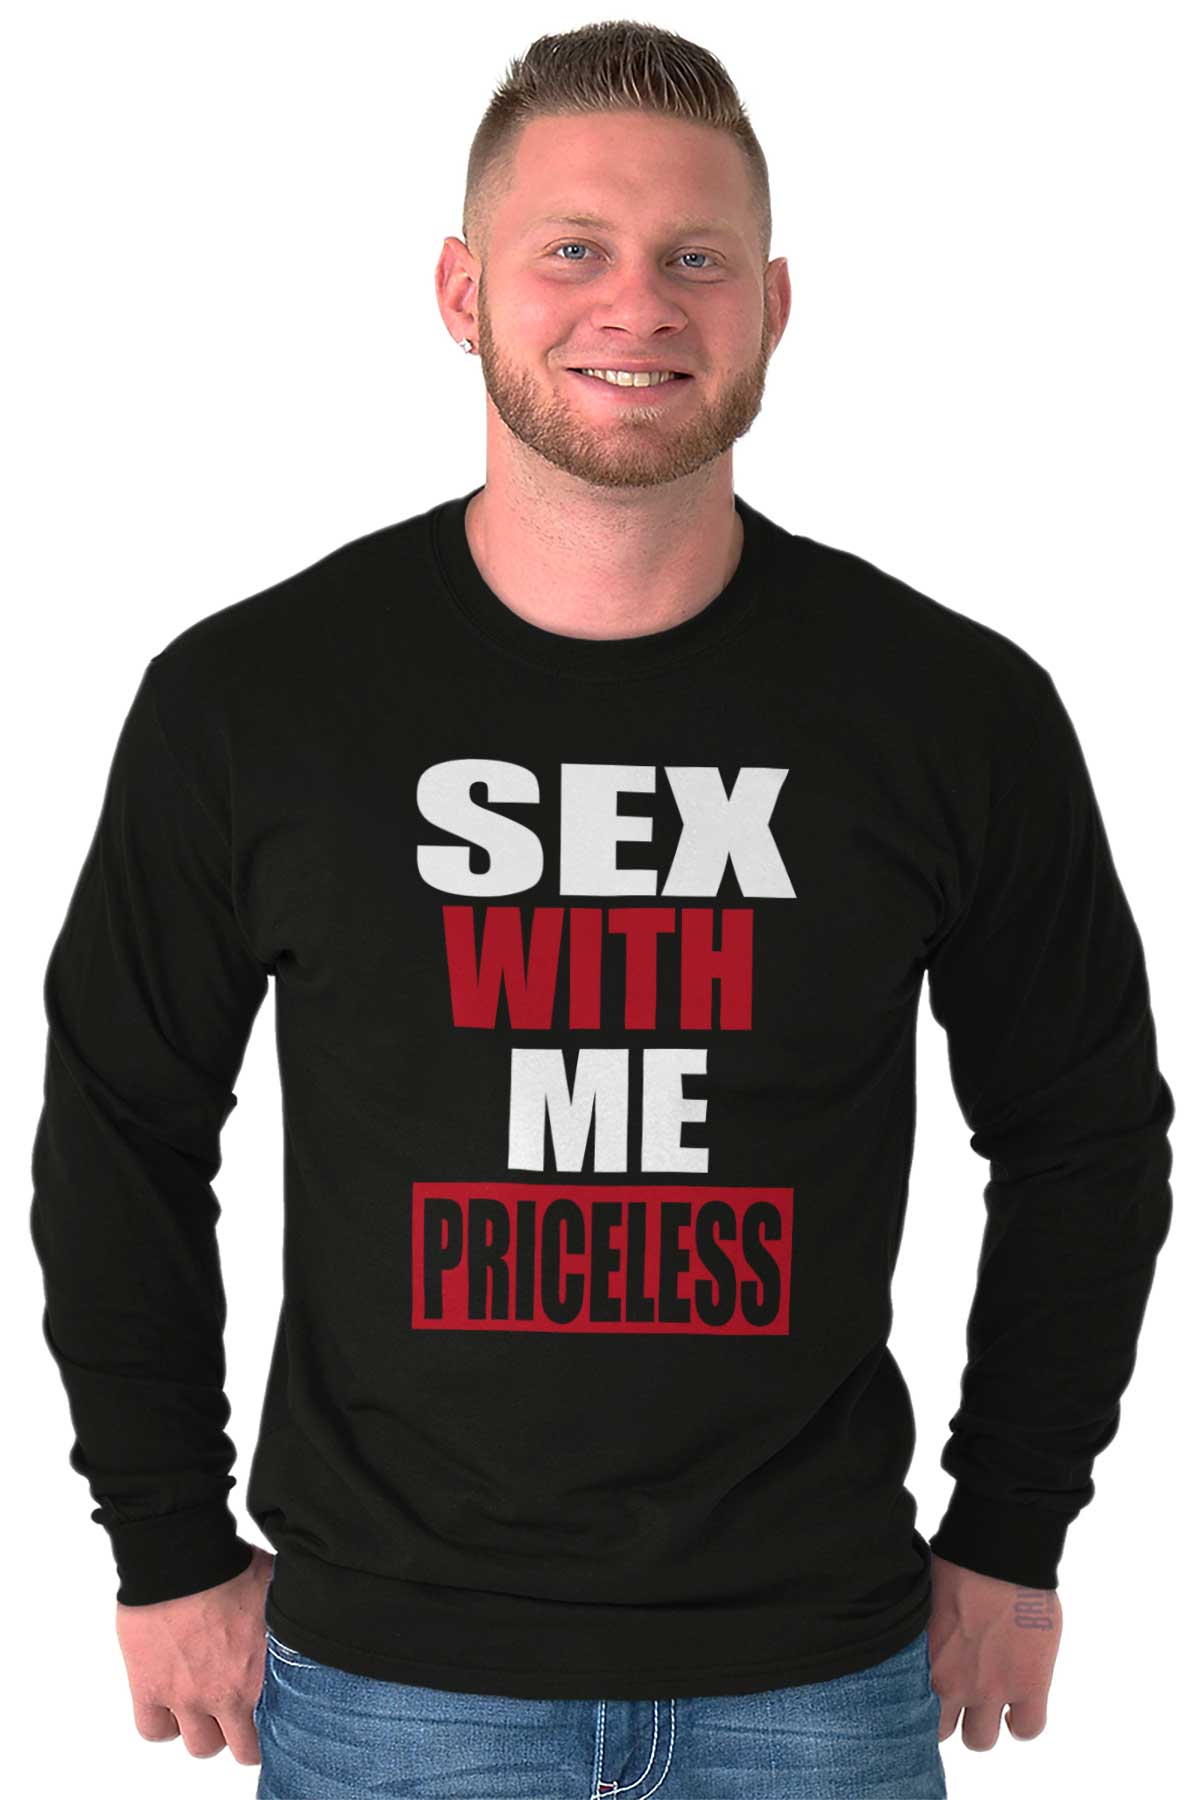 Sex With Me Priceless Funny College Novelty Long Sleeve Tshirt Tee For